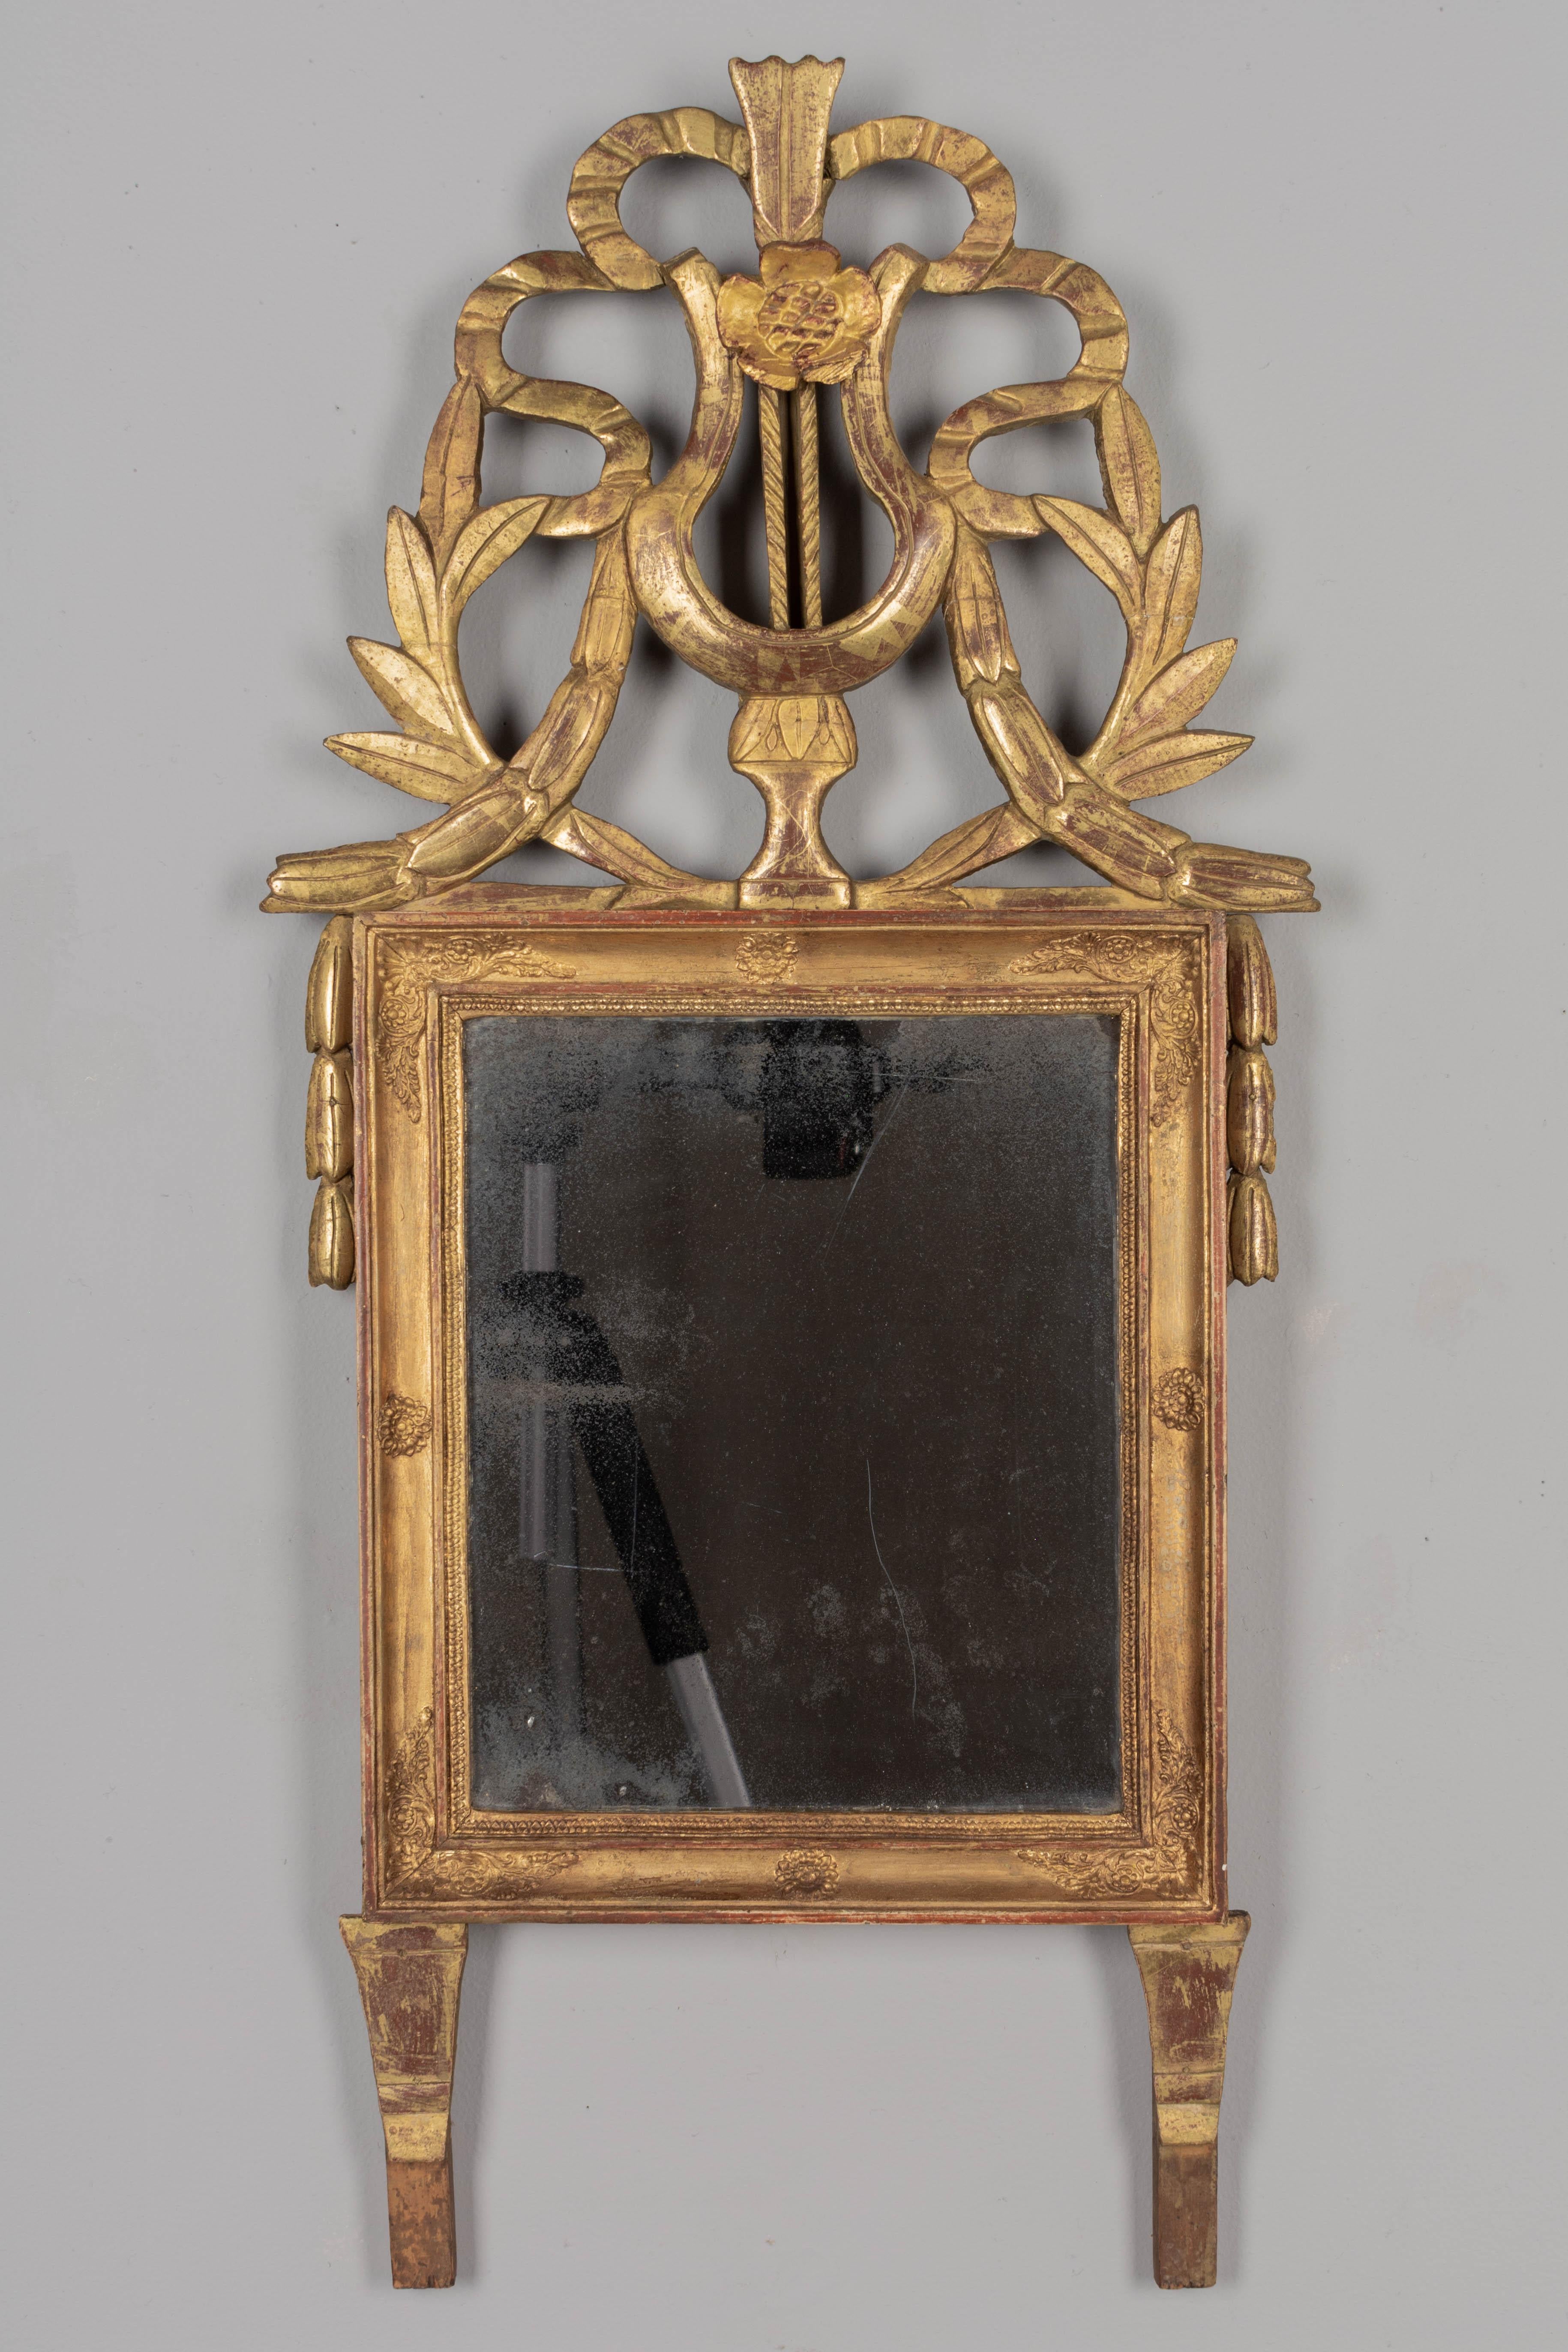 An early 19th century Louis XVI style French giltwood mirror. Large lyre shaped carved crest with ribbons and laurel leaves. All original with some restoration on the crest and minor losses. Warm gilt patina. A good antique mirror with old silvering